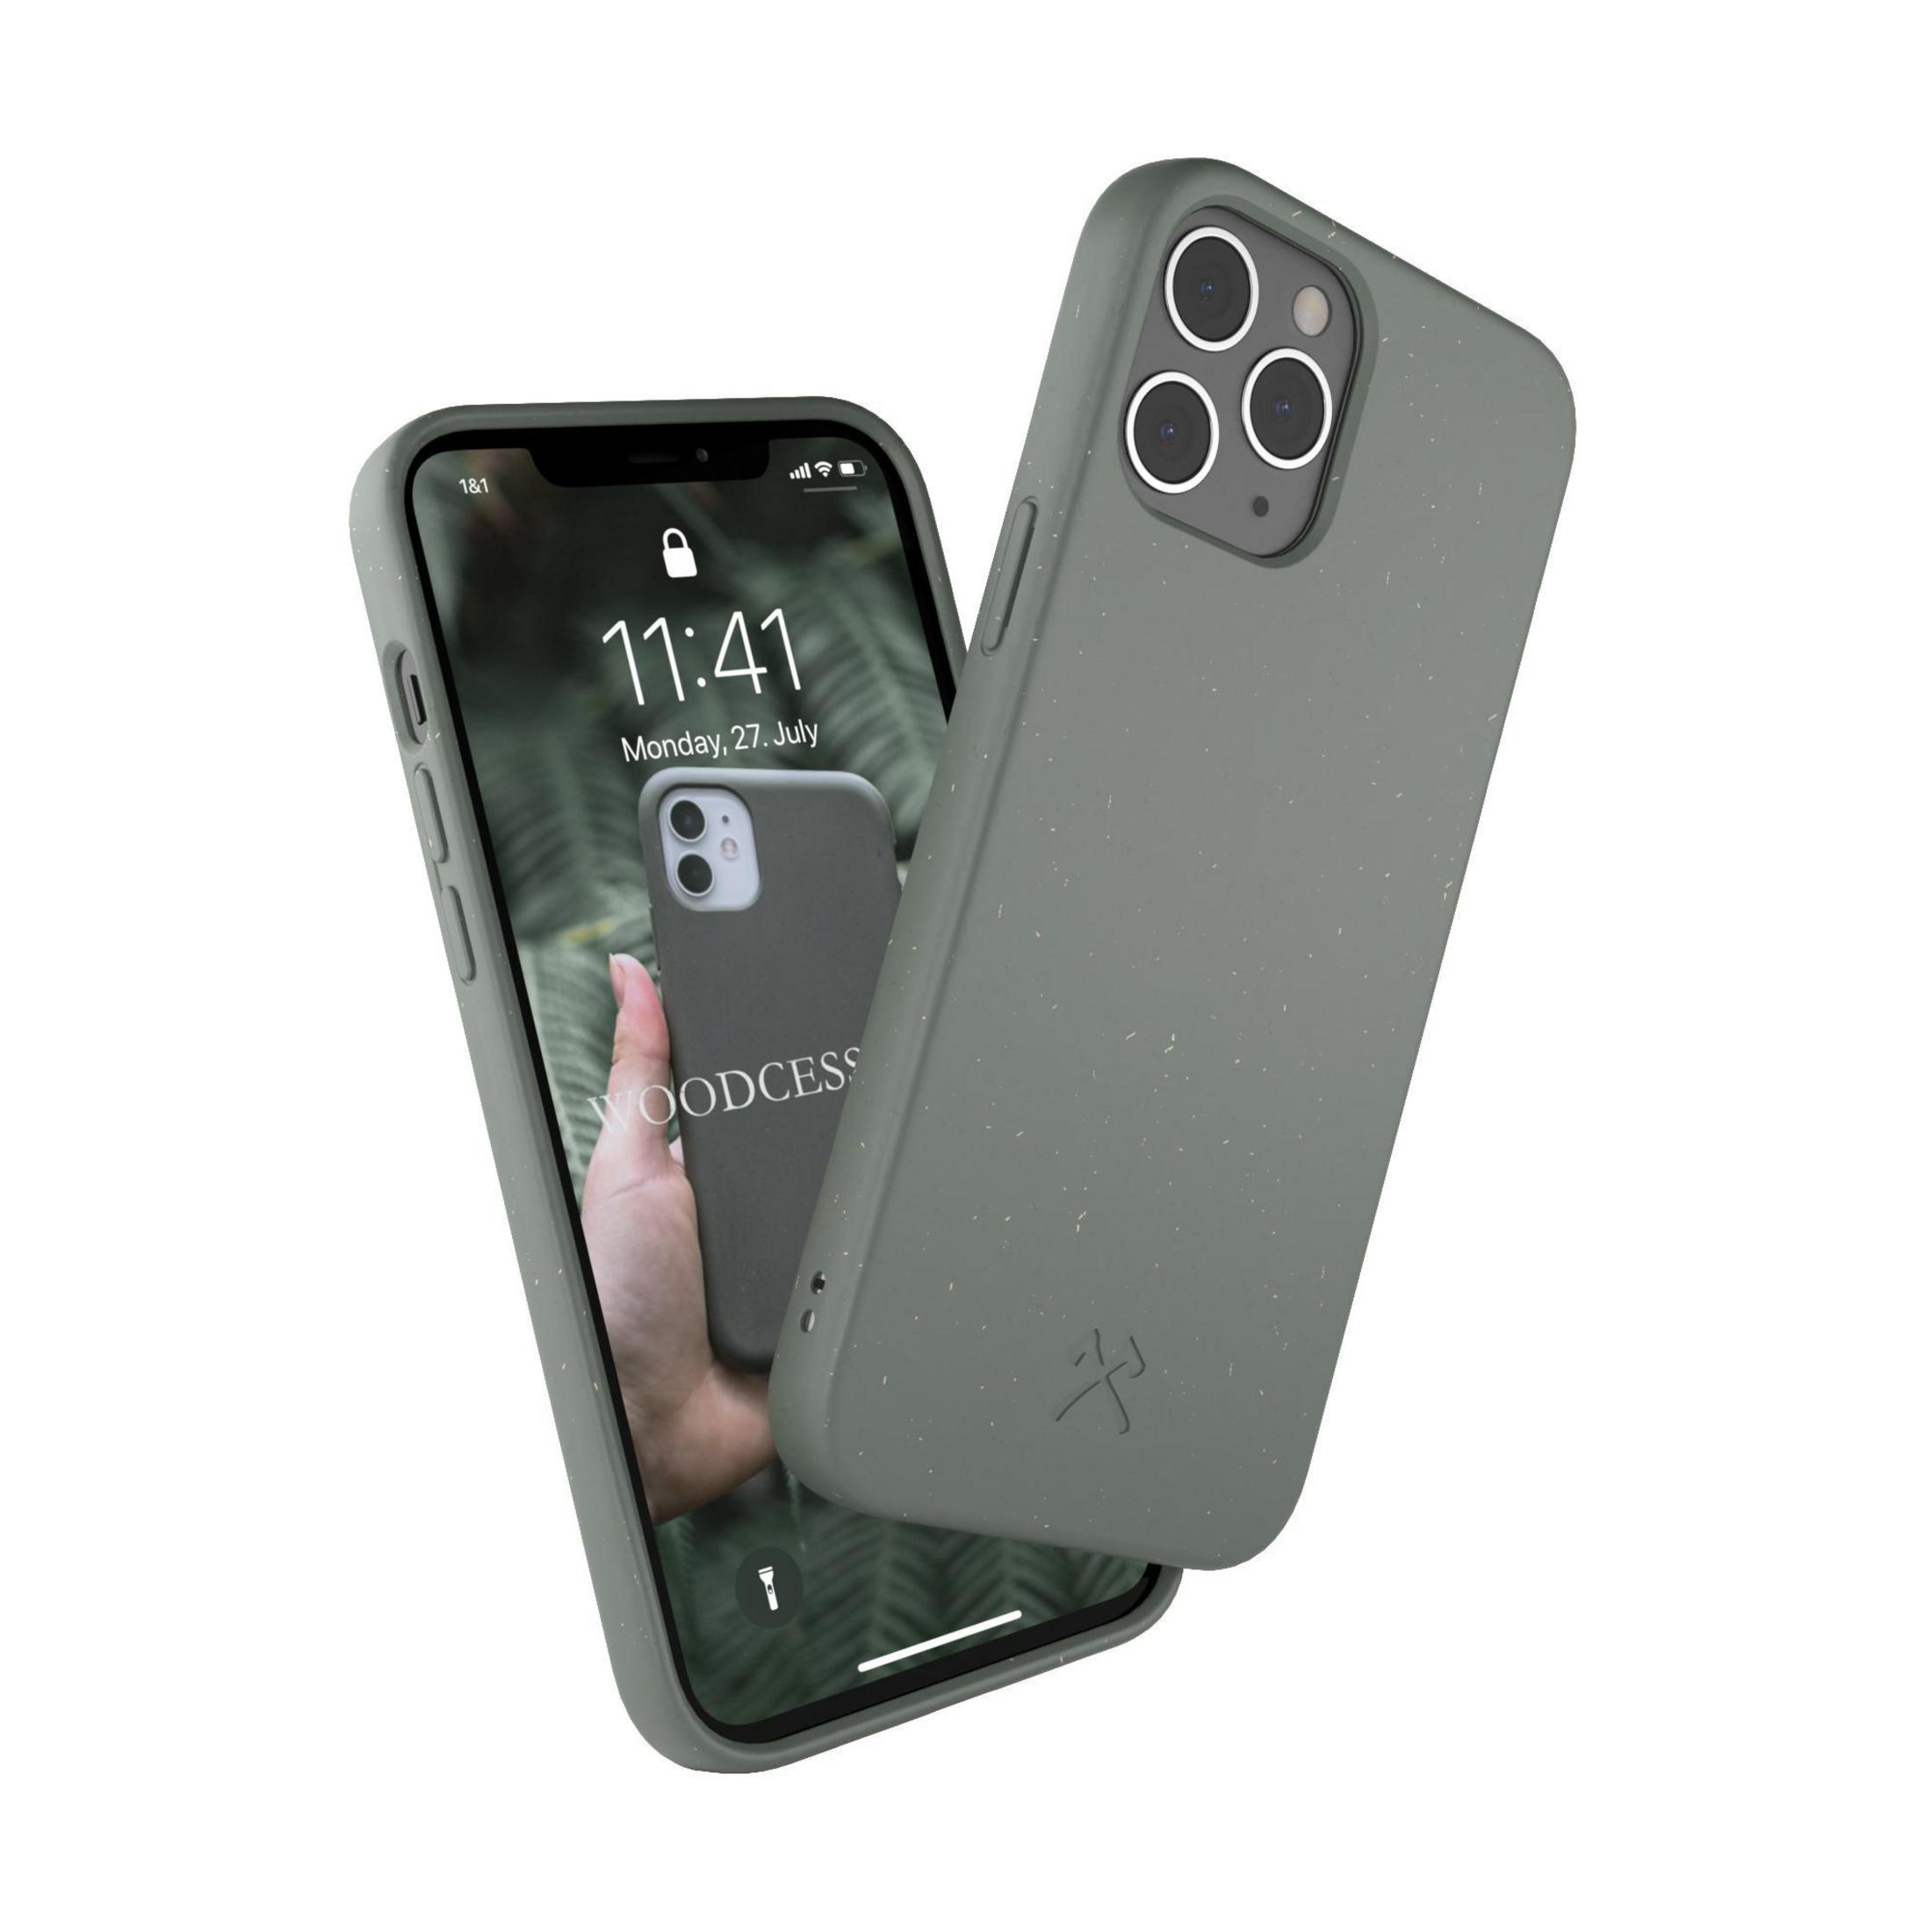 IP Backcover, ECO478 GREEN, 12, 12 iPhone CLASSIC Pro, iPhone BIO CASE 12 12 WOODCESSORIES Grün PRO Apple,